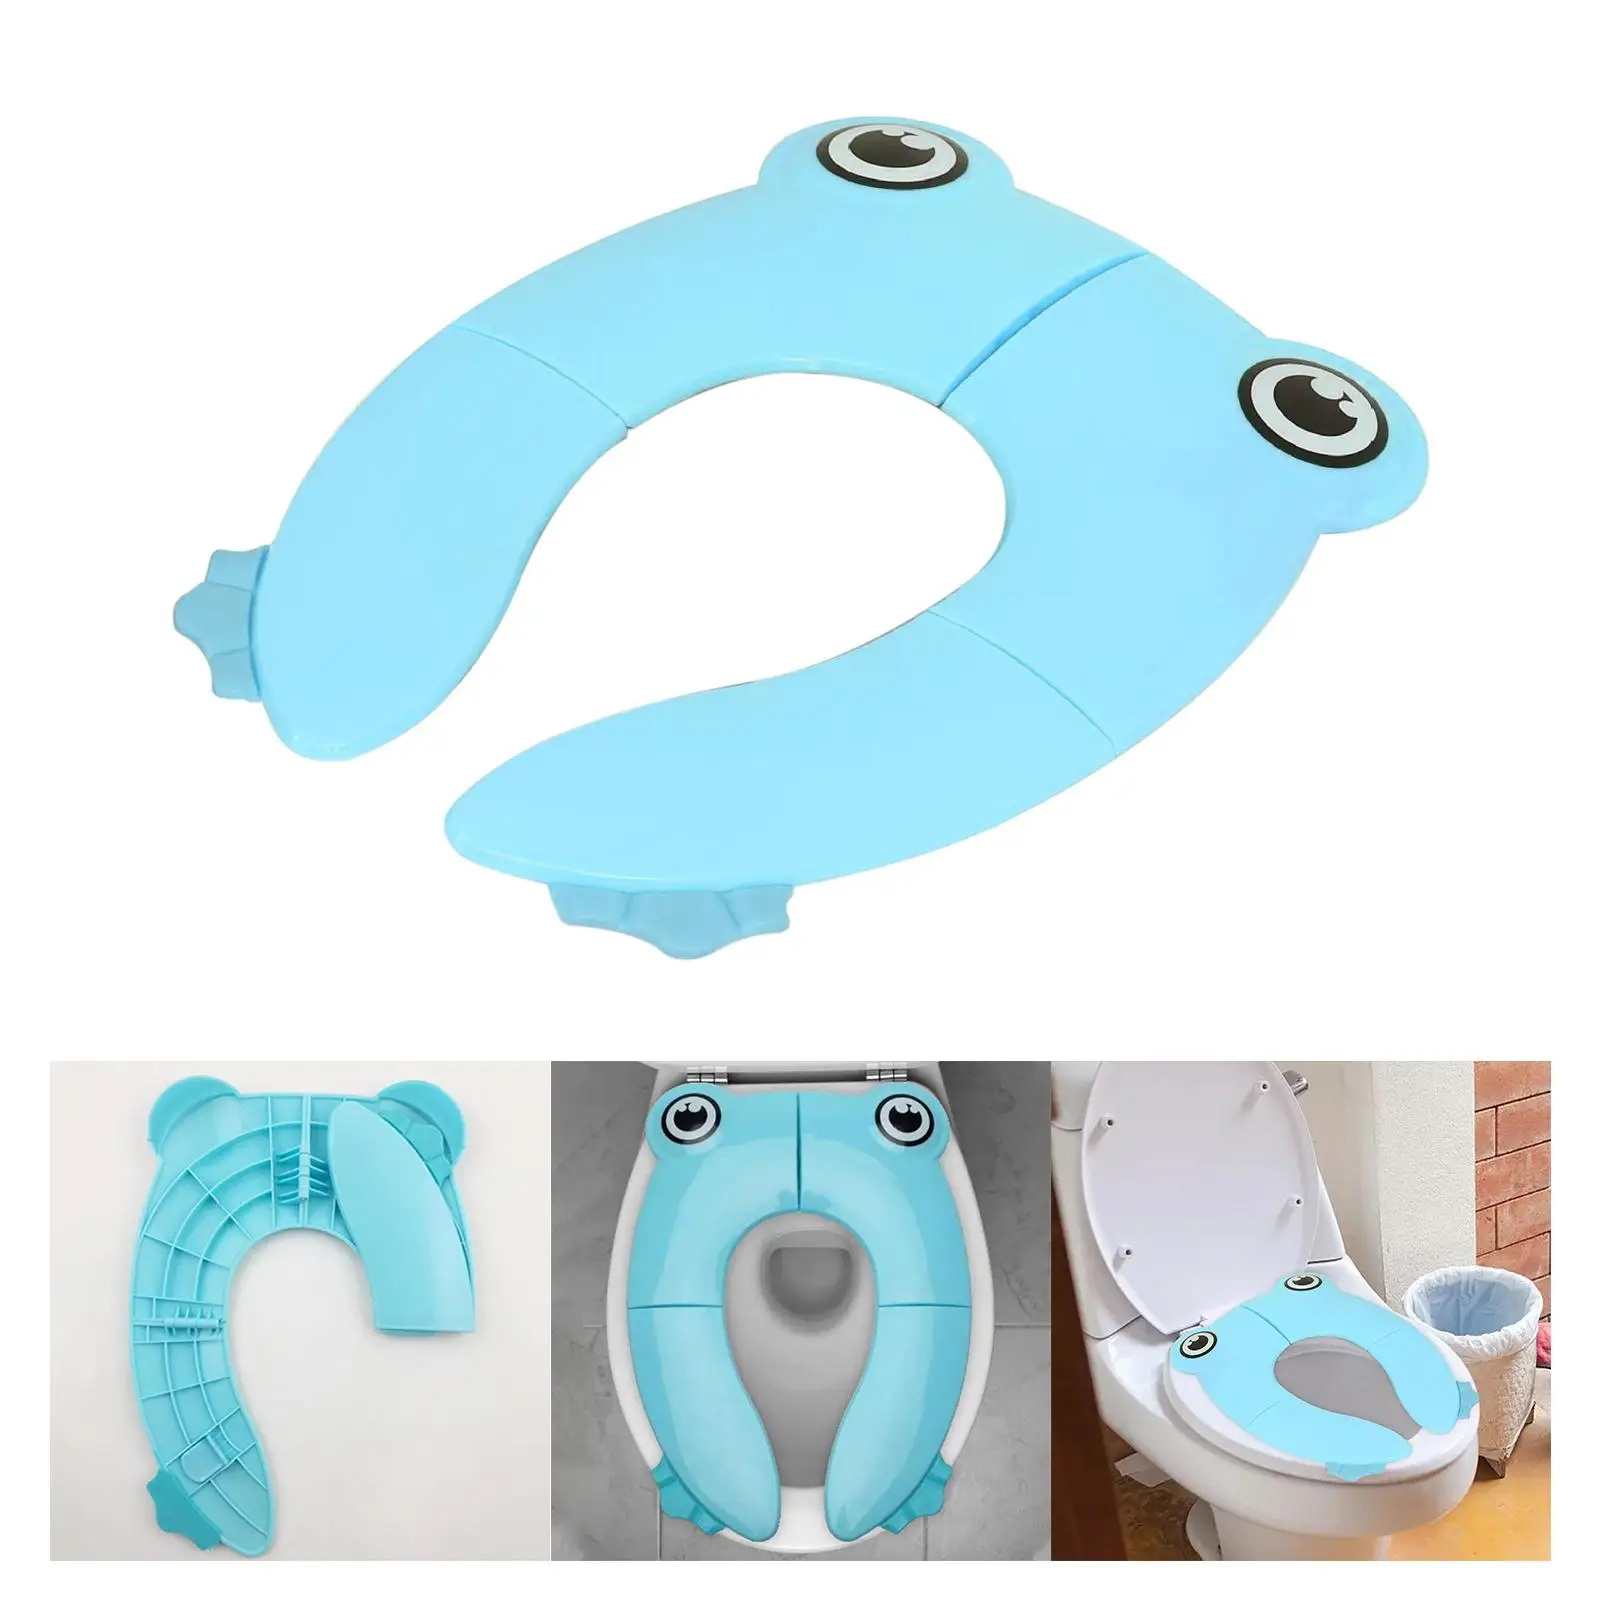 Folding Potty Seat Covers Comfortable for Traveling Camping Toddler